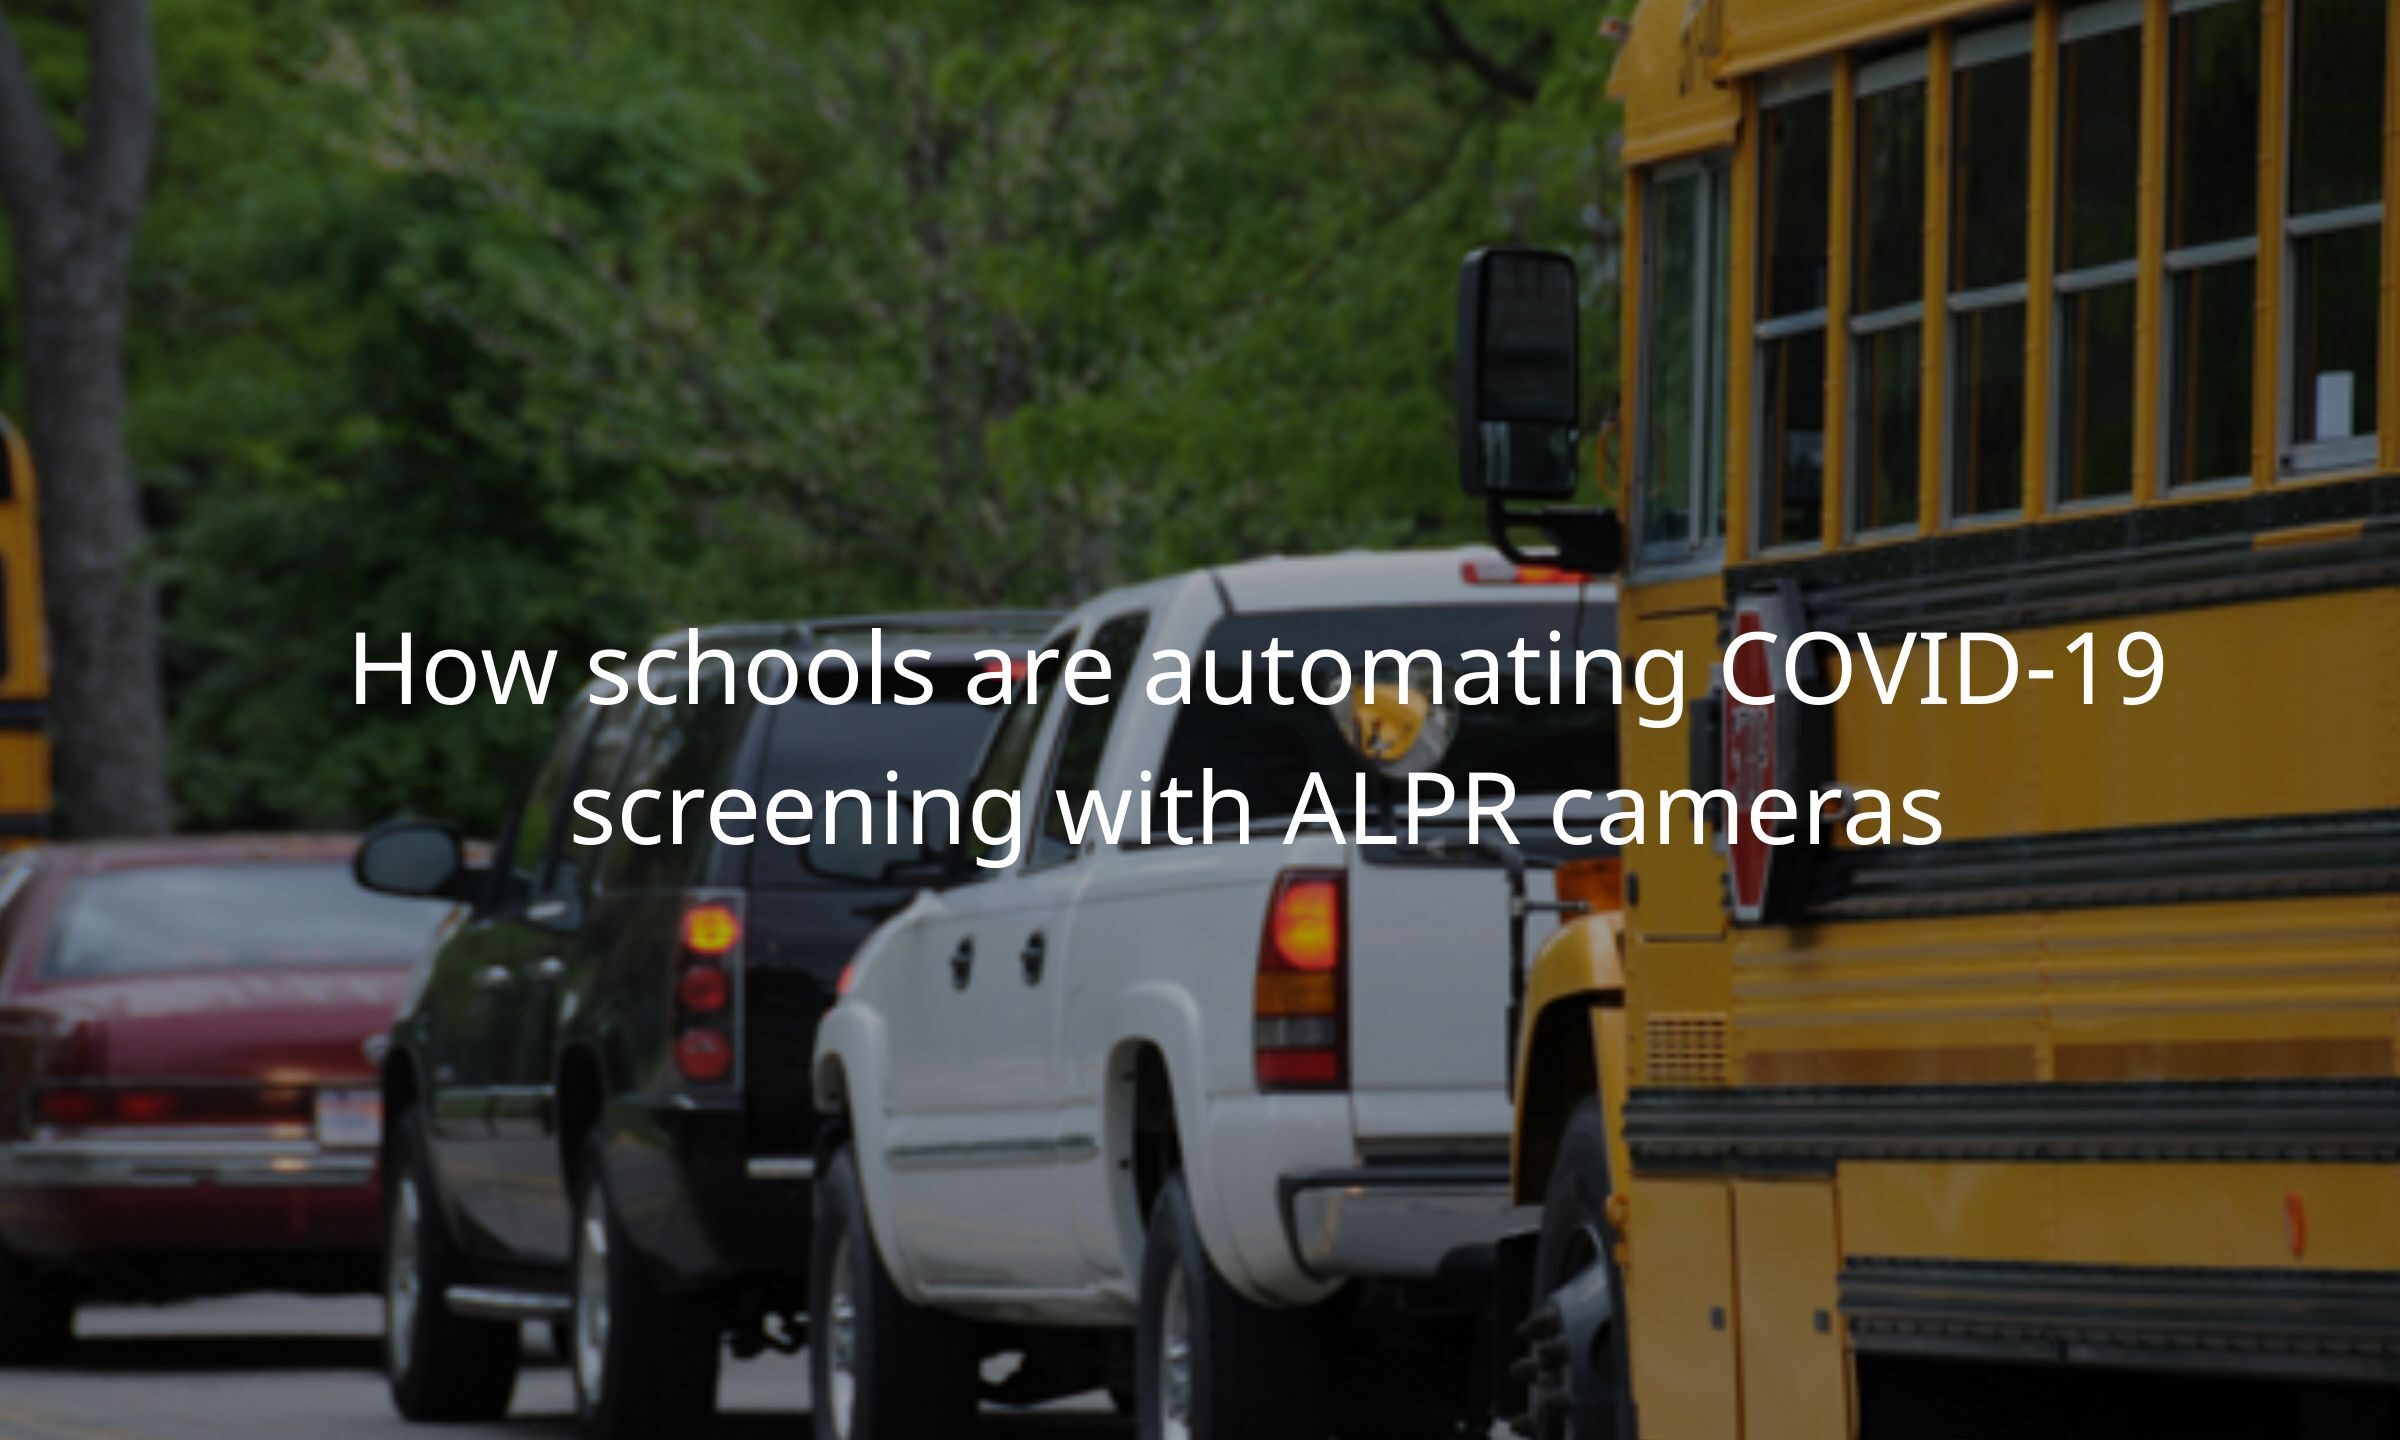 How schools are automating COVID-19 screening with ALPR cameras